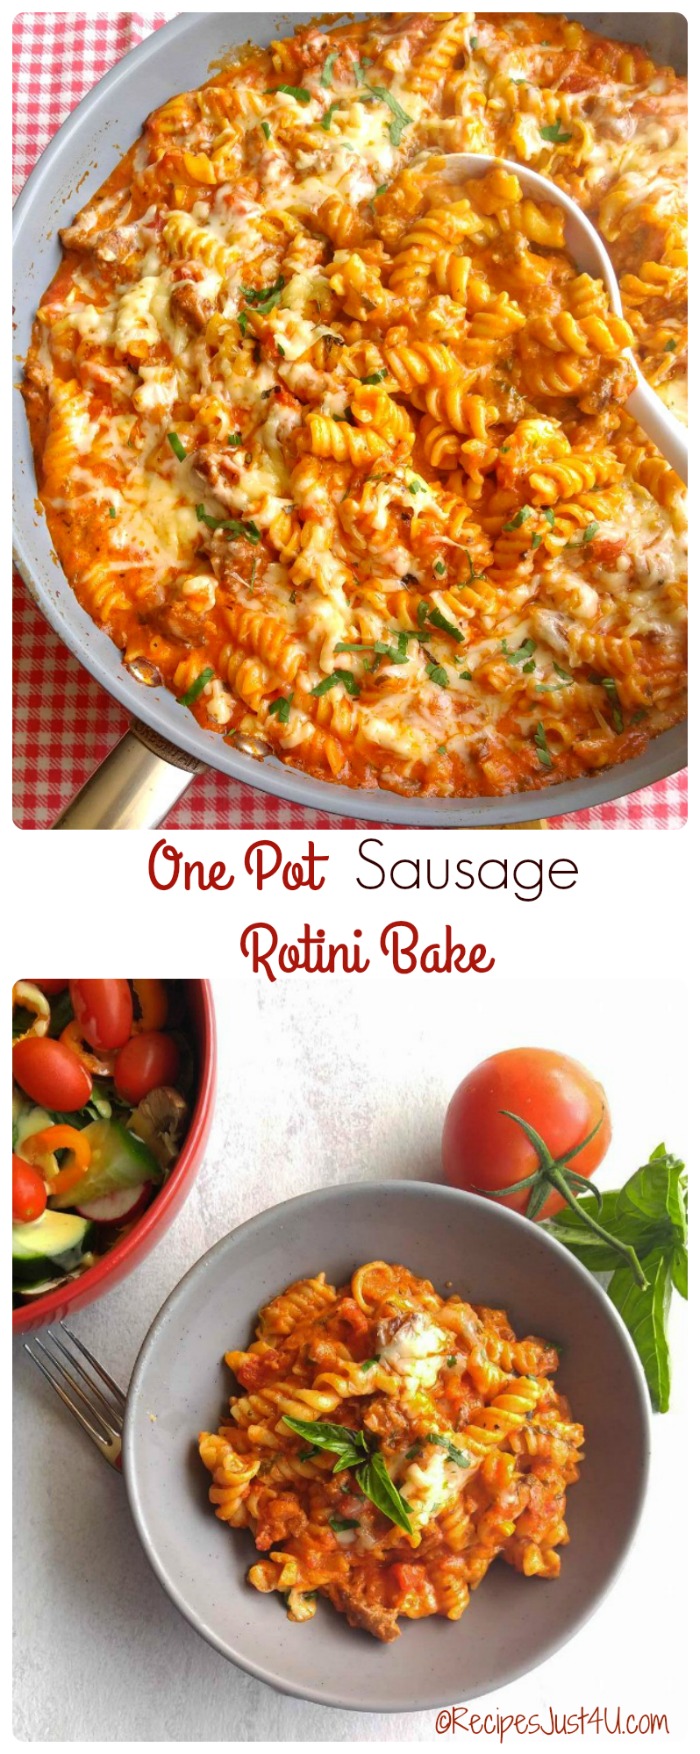 This one pot sausage rotini bake is made in one pan in less than 30 minutes. Clean up is a breeze too! 